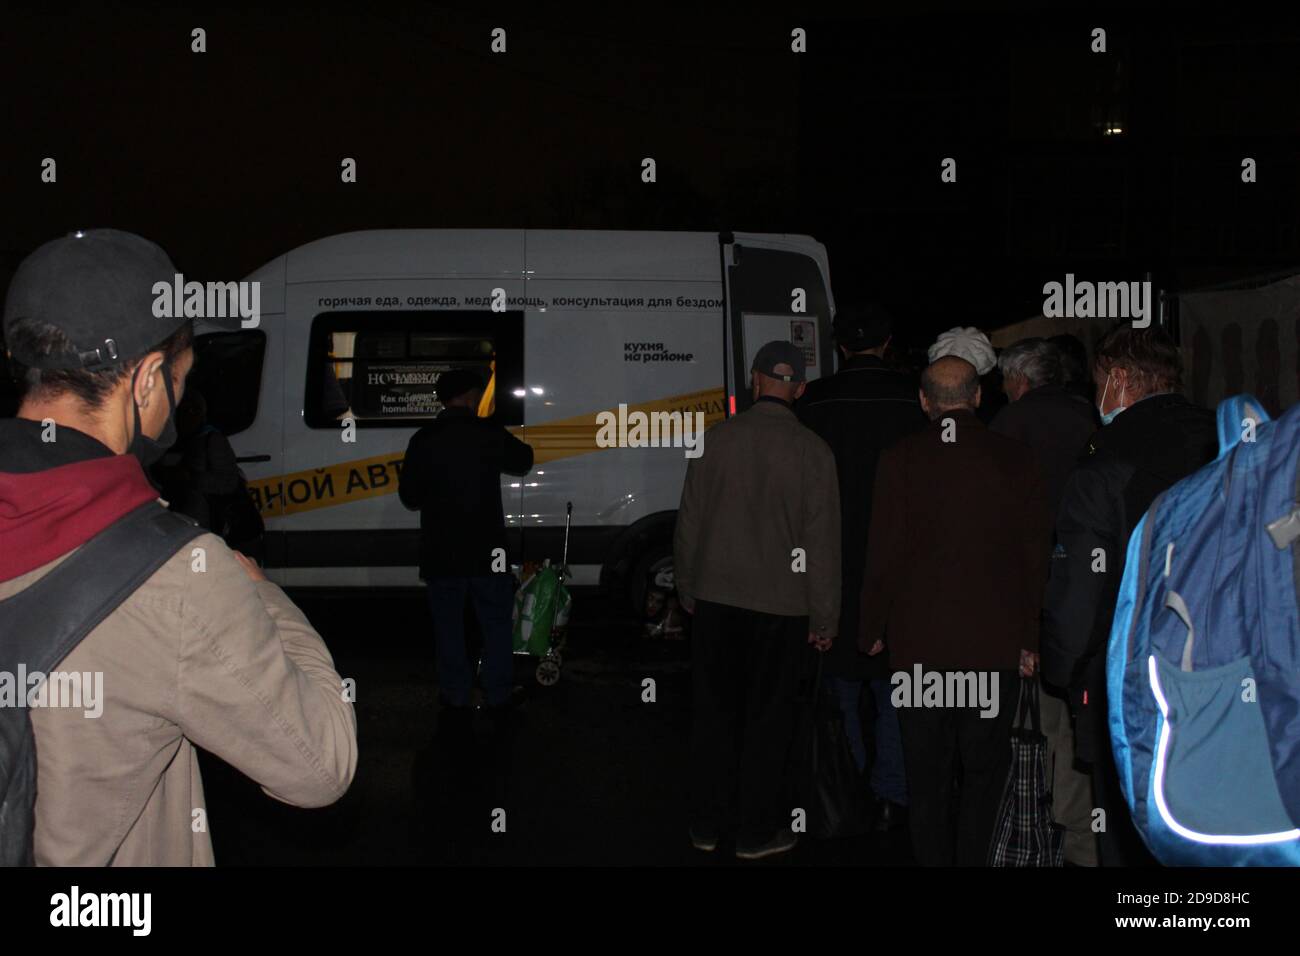 Moskau, Russia. 12th Oct, 2020. Hundreds of homeless people stand in front of a bus of the NGO Notschleschka at night and wait for food. Thousands of homeless people fight for their survival every day in harsh Moscow. The Corona crisis makes their situation even more precarious. But there is hope. (to dpa: 'Corona aggravates situation for homeless in Moscow') Credit: Claudia Thaler/dpa/Alamy Live News Stock Photo